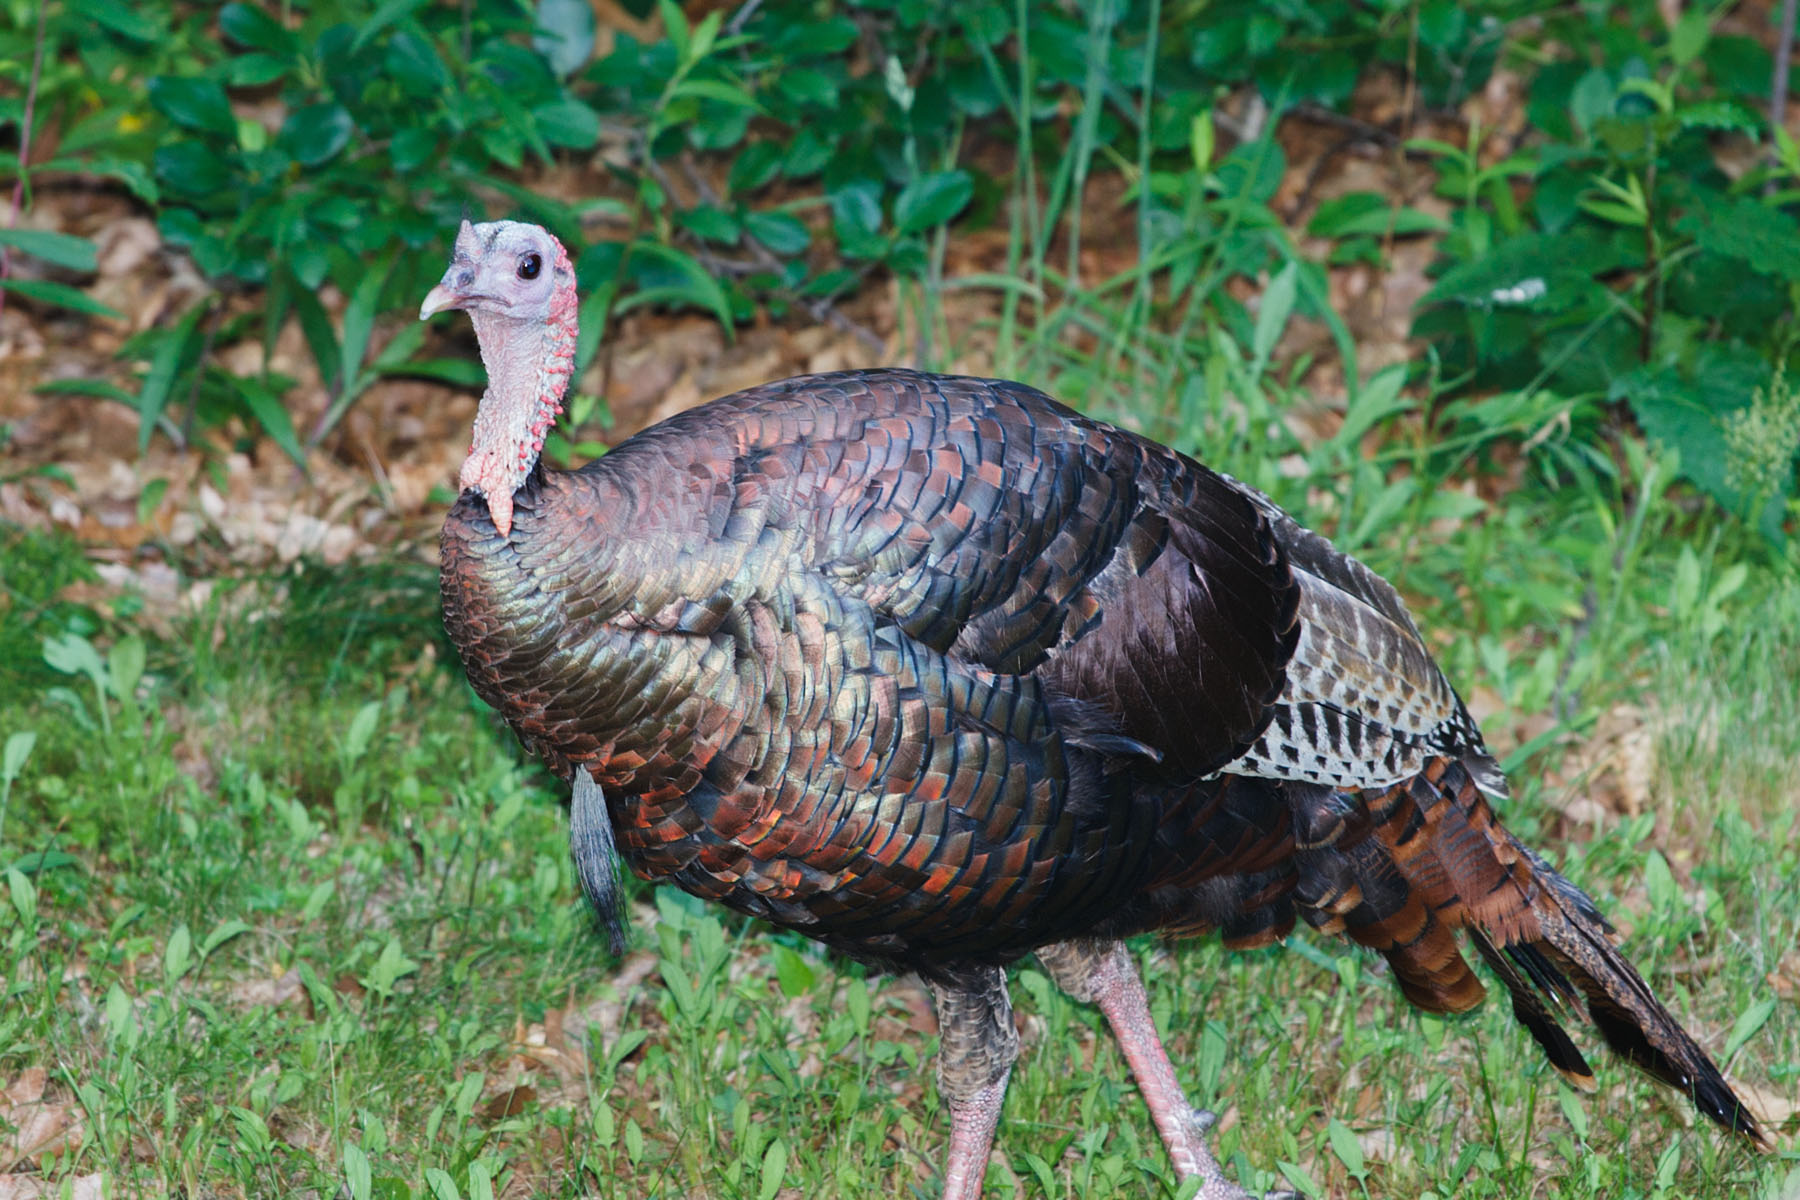 Turkey in yard.  Click for next photo.